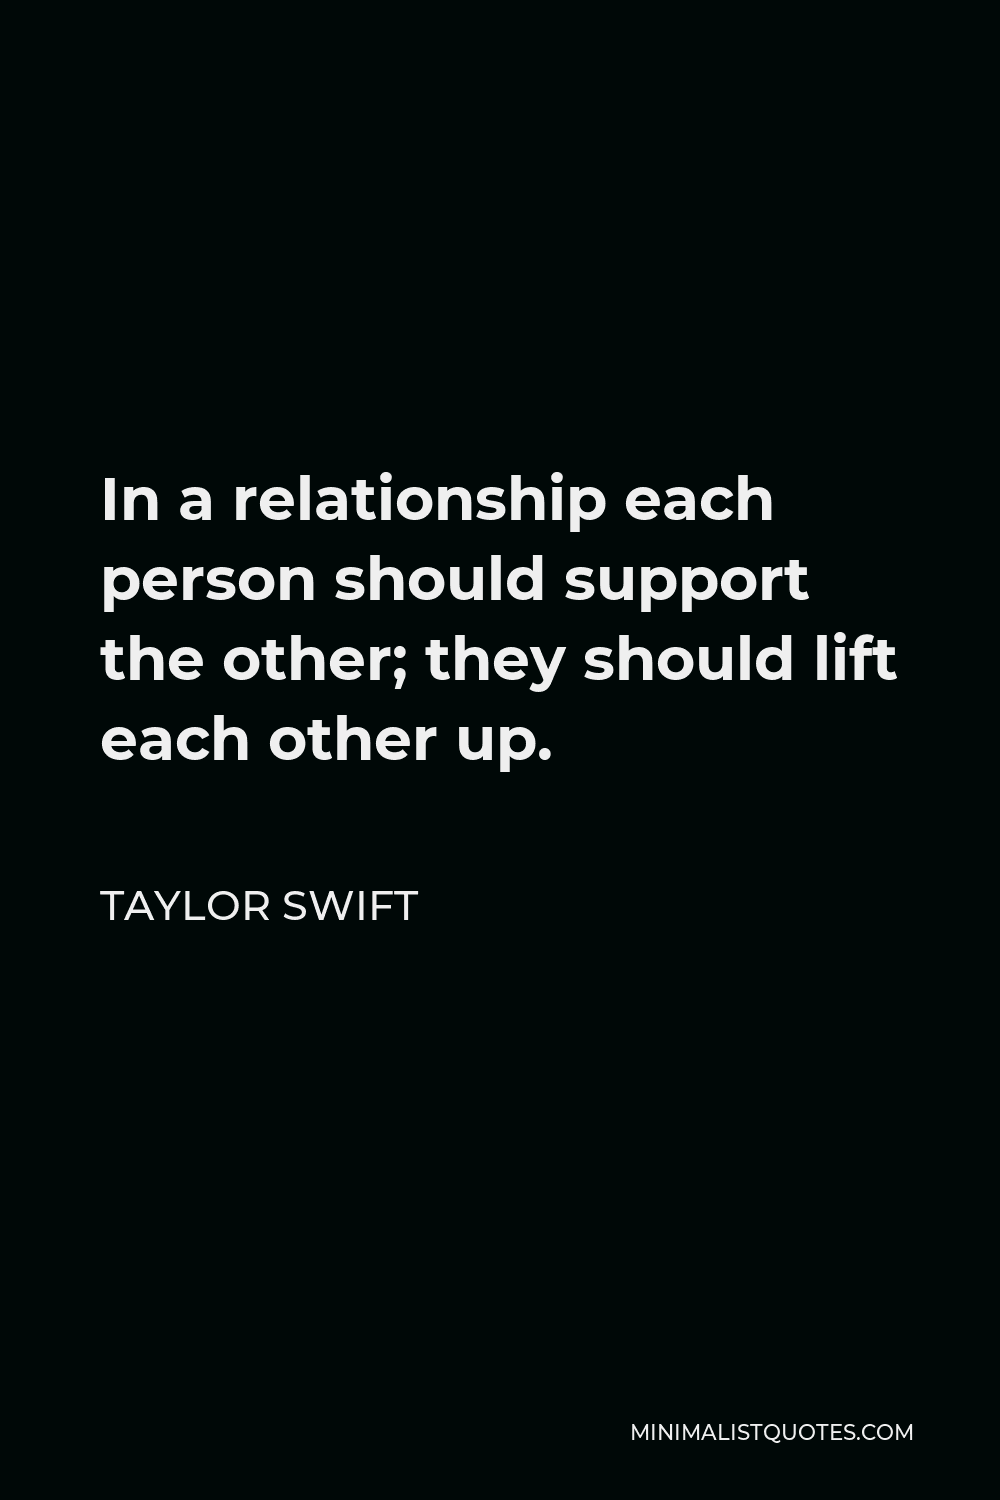 Taylor Swift Quote - In a relationship each person should support the other; they should lift each other up.